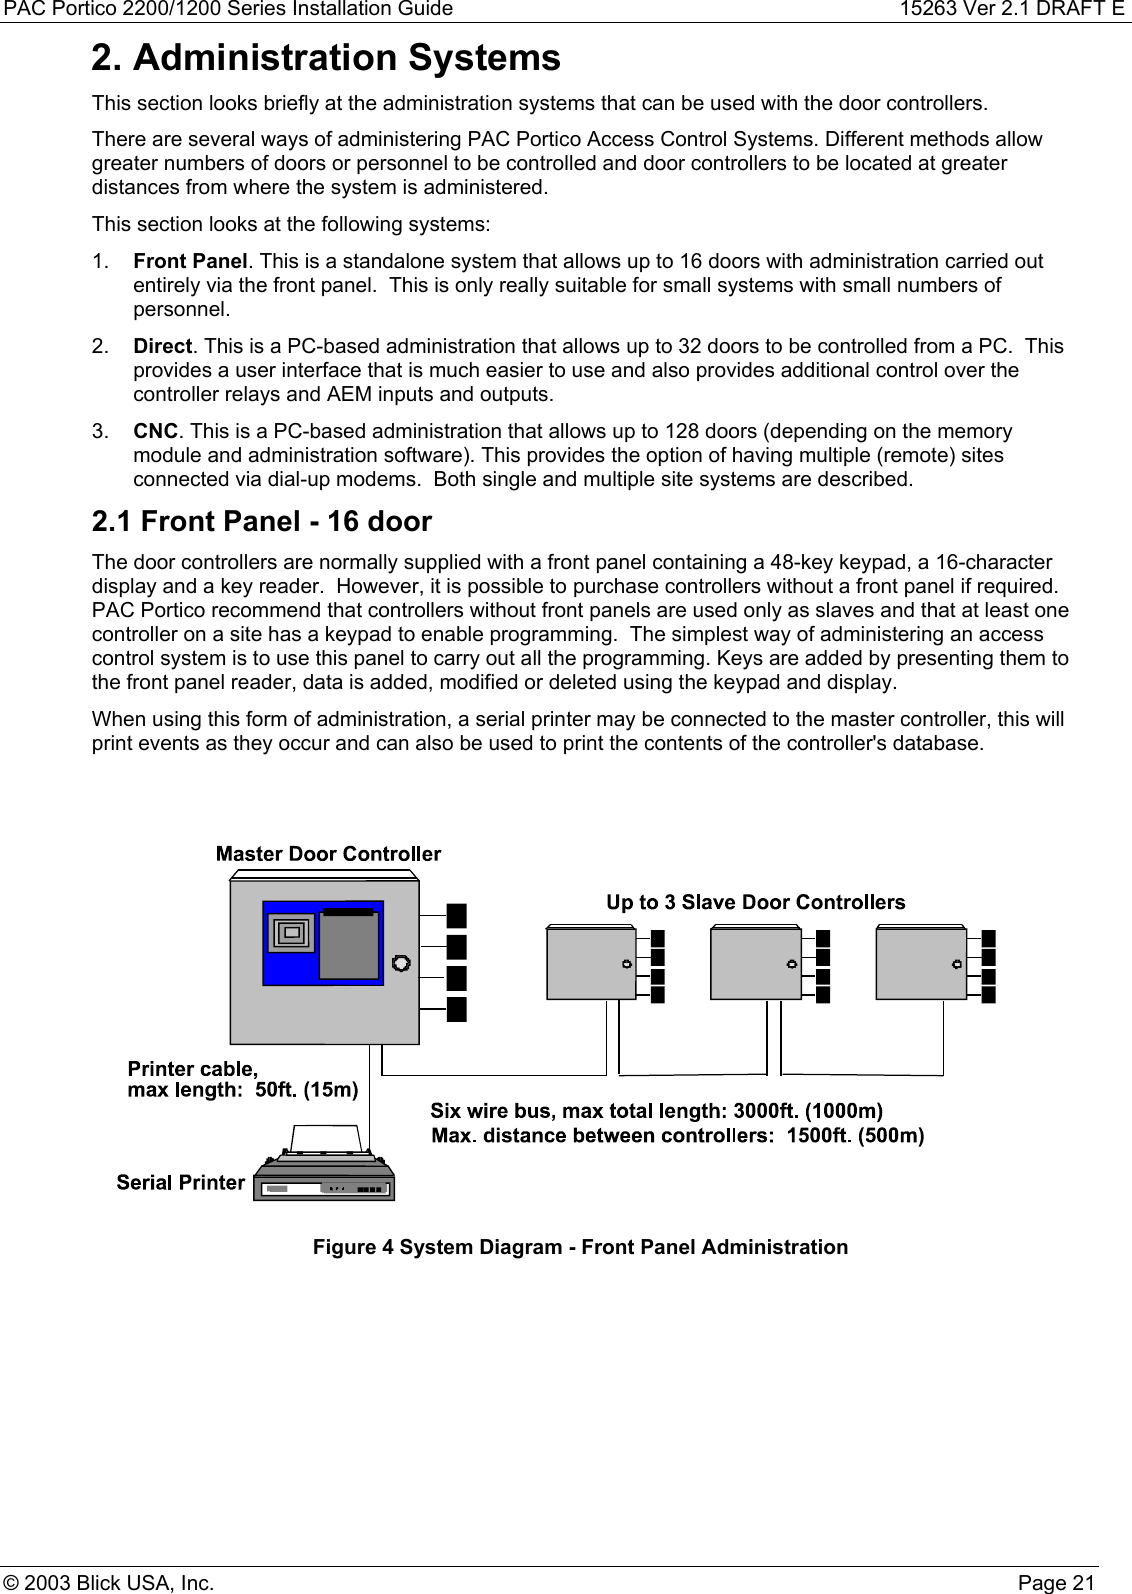 PAC Portico 2200/1200 Series Installation Guide 15263 Ver 2.1 DRAFT E© 2003 Blick USA, Inc. Page 212. Administration SystemsThis section looks briefly at the administration systems that can be used with the door controllers.There are several ways of administering PAC Portico Access Control Systems. Different methods allowgreater numbers of doors or personnel to be controlled and door controllers to be located at greaterdistances from where the system is administered.This section looks at the following systems:1.  Front Panel. This is a standalone system that allows up to 16 doors with administration carried outentirely via the front panel.  This is only really suitable for small systems with small numbers ofpersonnel.2.  Direct. This is a PC-based administration that allows up to 32 doors to be controlled from a PC.  Thisprovides a user interface that is much easier to use and also provides additional control over thecontroller relays and AEM inputs and outputs.3.  CNC. This is a PC-based administration that allows up to 128 doors (depending on the memorymodule and administration software). This provides the option of having multiple (remote) sitesconnected via dial-up modems.  Both single and multiple site systems are described.2.1 Front Panel - 16 doorThe door controllers are normally supplied with a front panel containing a 48-key keypad, a 16-characterdisplay and a key reader.  However, it is possible to purchase controllers without a front panel if required.PAC Portico recommend that controllers without front panels are used only as slaves and that at least onecontroller on a site has a keypad to enable programming.  The simplest way of administering an accesscontrol system is to use this panel to carry out all the programming. Keys are added by presenting them tothe front panel reader, data is added, modified or deleted using the keypad and display.When using this form of administration, a serial printer may be connected to the master controller, this willprint events as they occur and can also be used to print the contents of the controller&apos;s database.Figure 4 System Diagram - Front Panel Administration